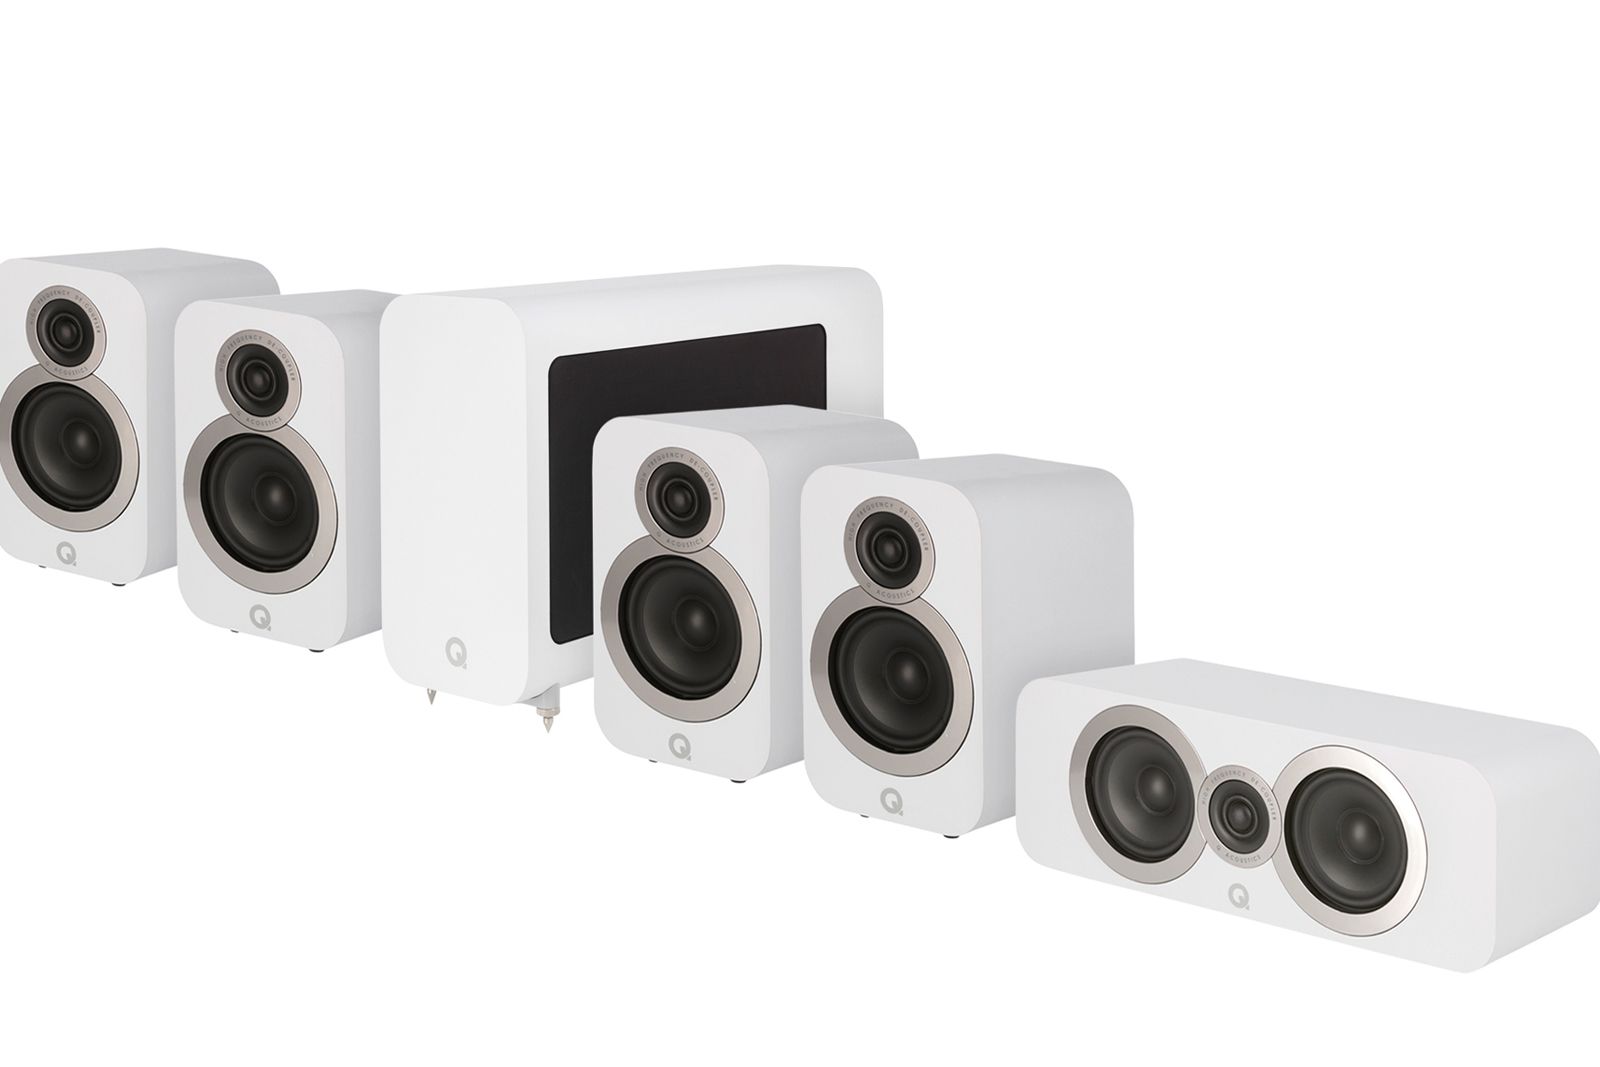 Q Acoustics intros revamped 3000i Series speakers from £199 image 3